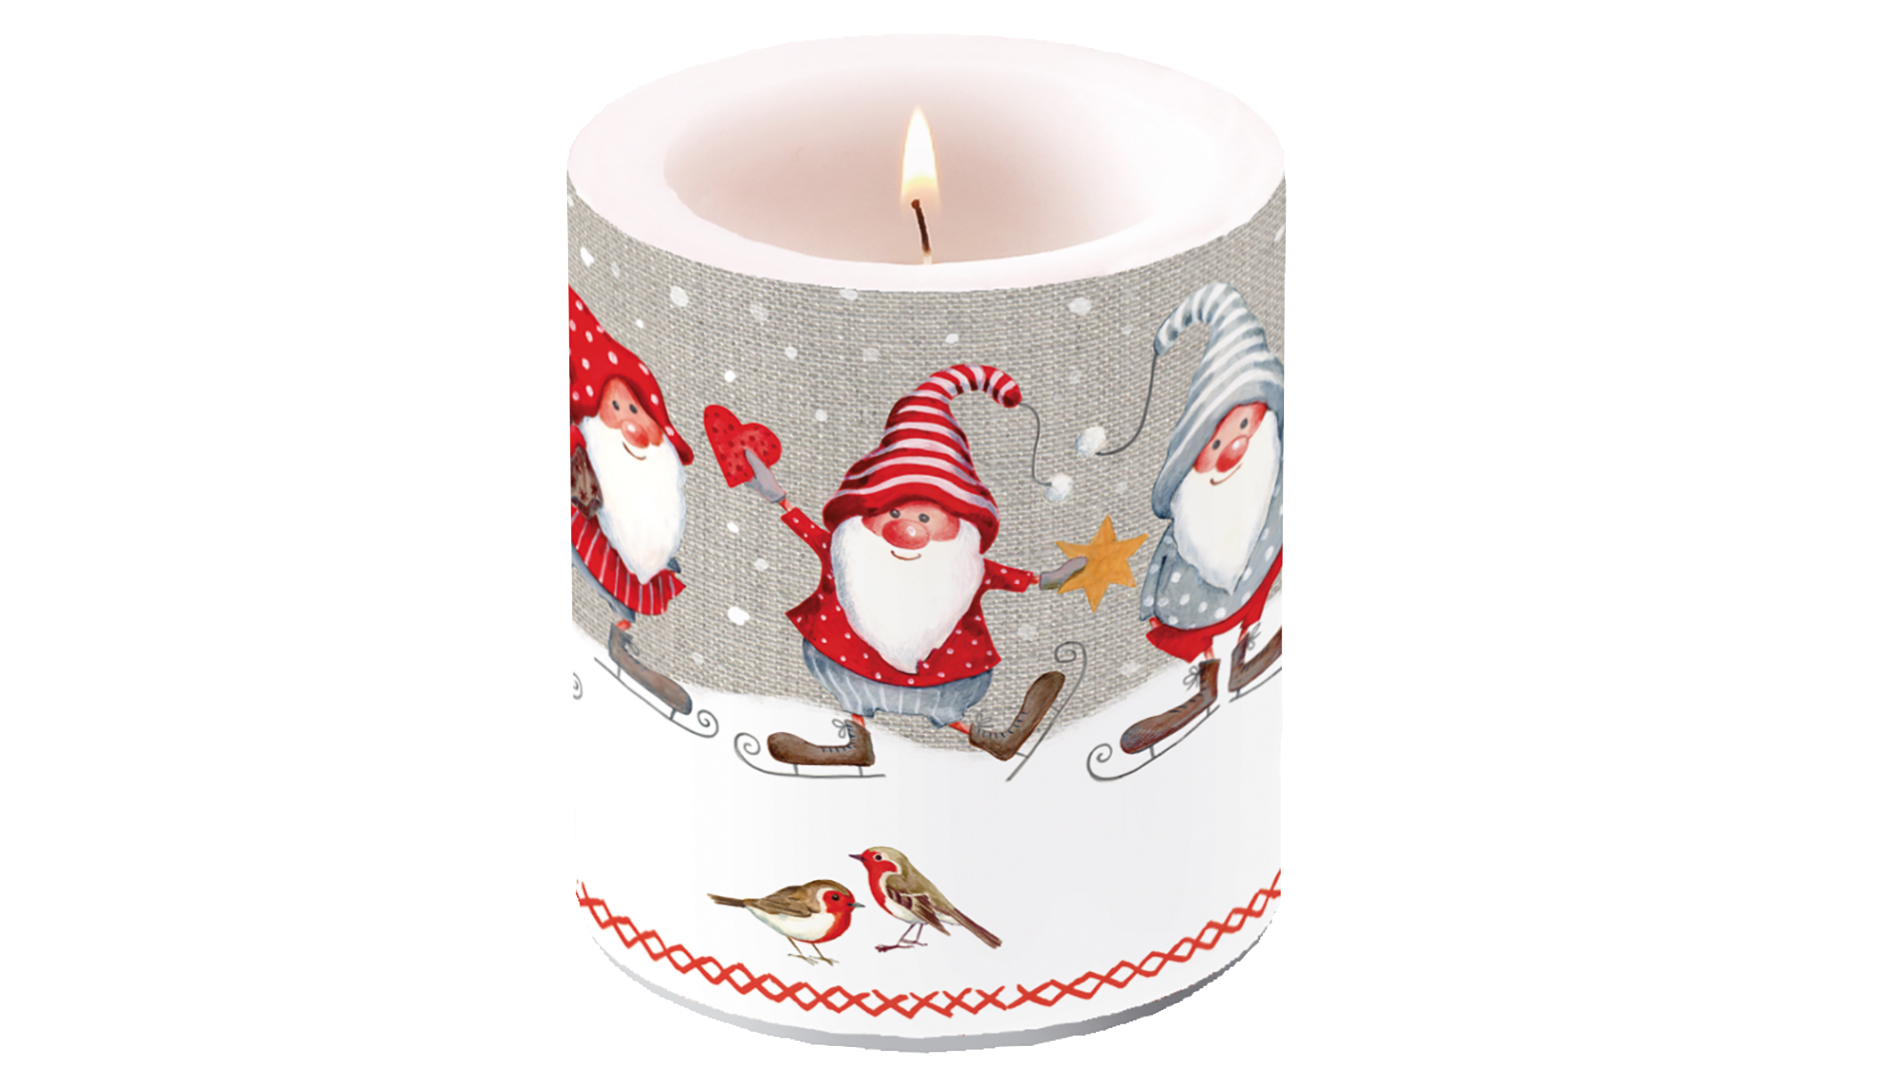 The Skating Dwarfs collection with funny Christmas gnomes is a big hit at Ambiente Europe - but candles with stylish winter forest motifs, birds and squirrels are also doing well. Photo: Ambiente Europe